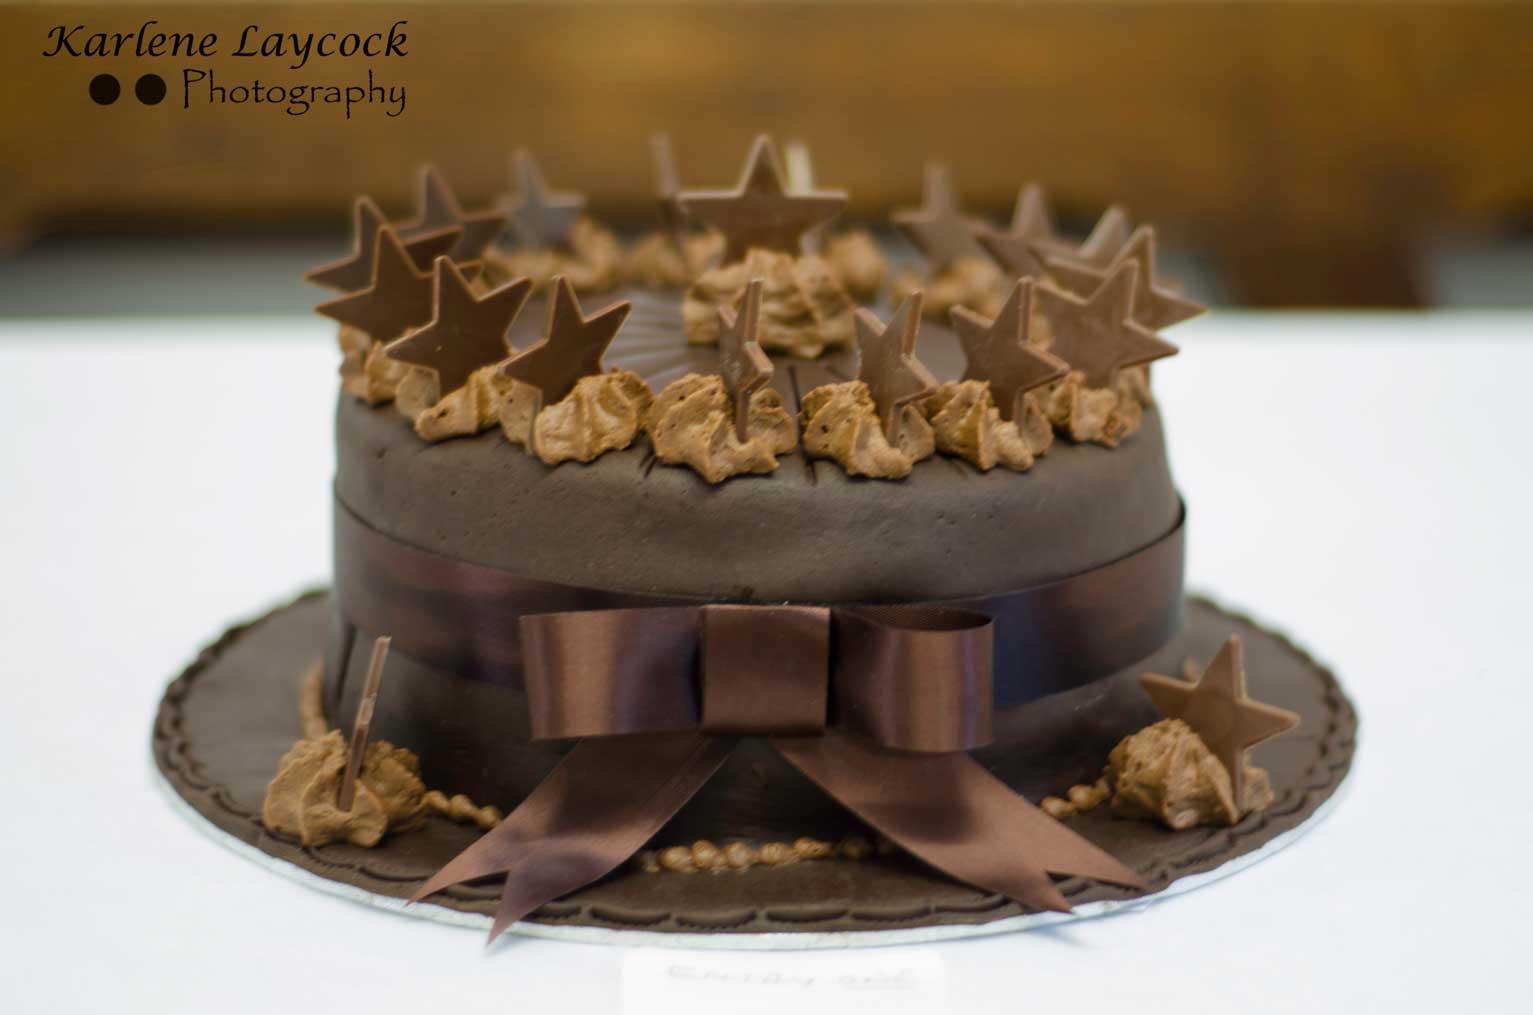 Photograph of Chocolate Celebration Cake topped with Stars taken at a Local Bake Off Event